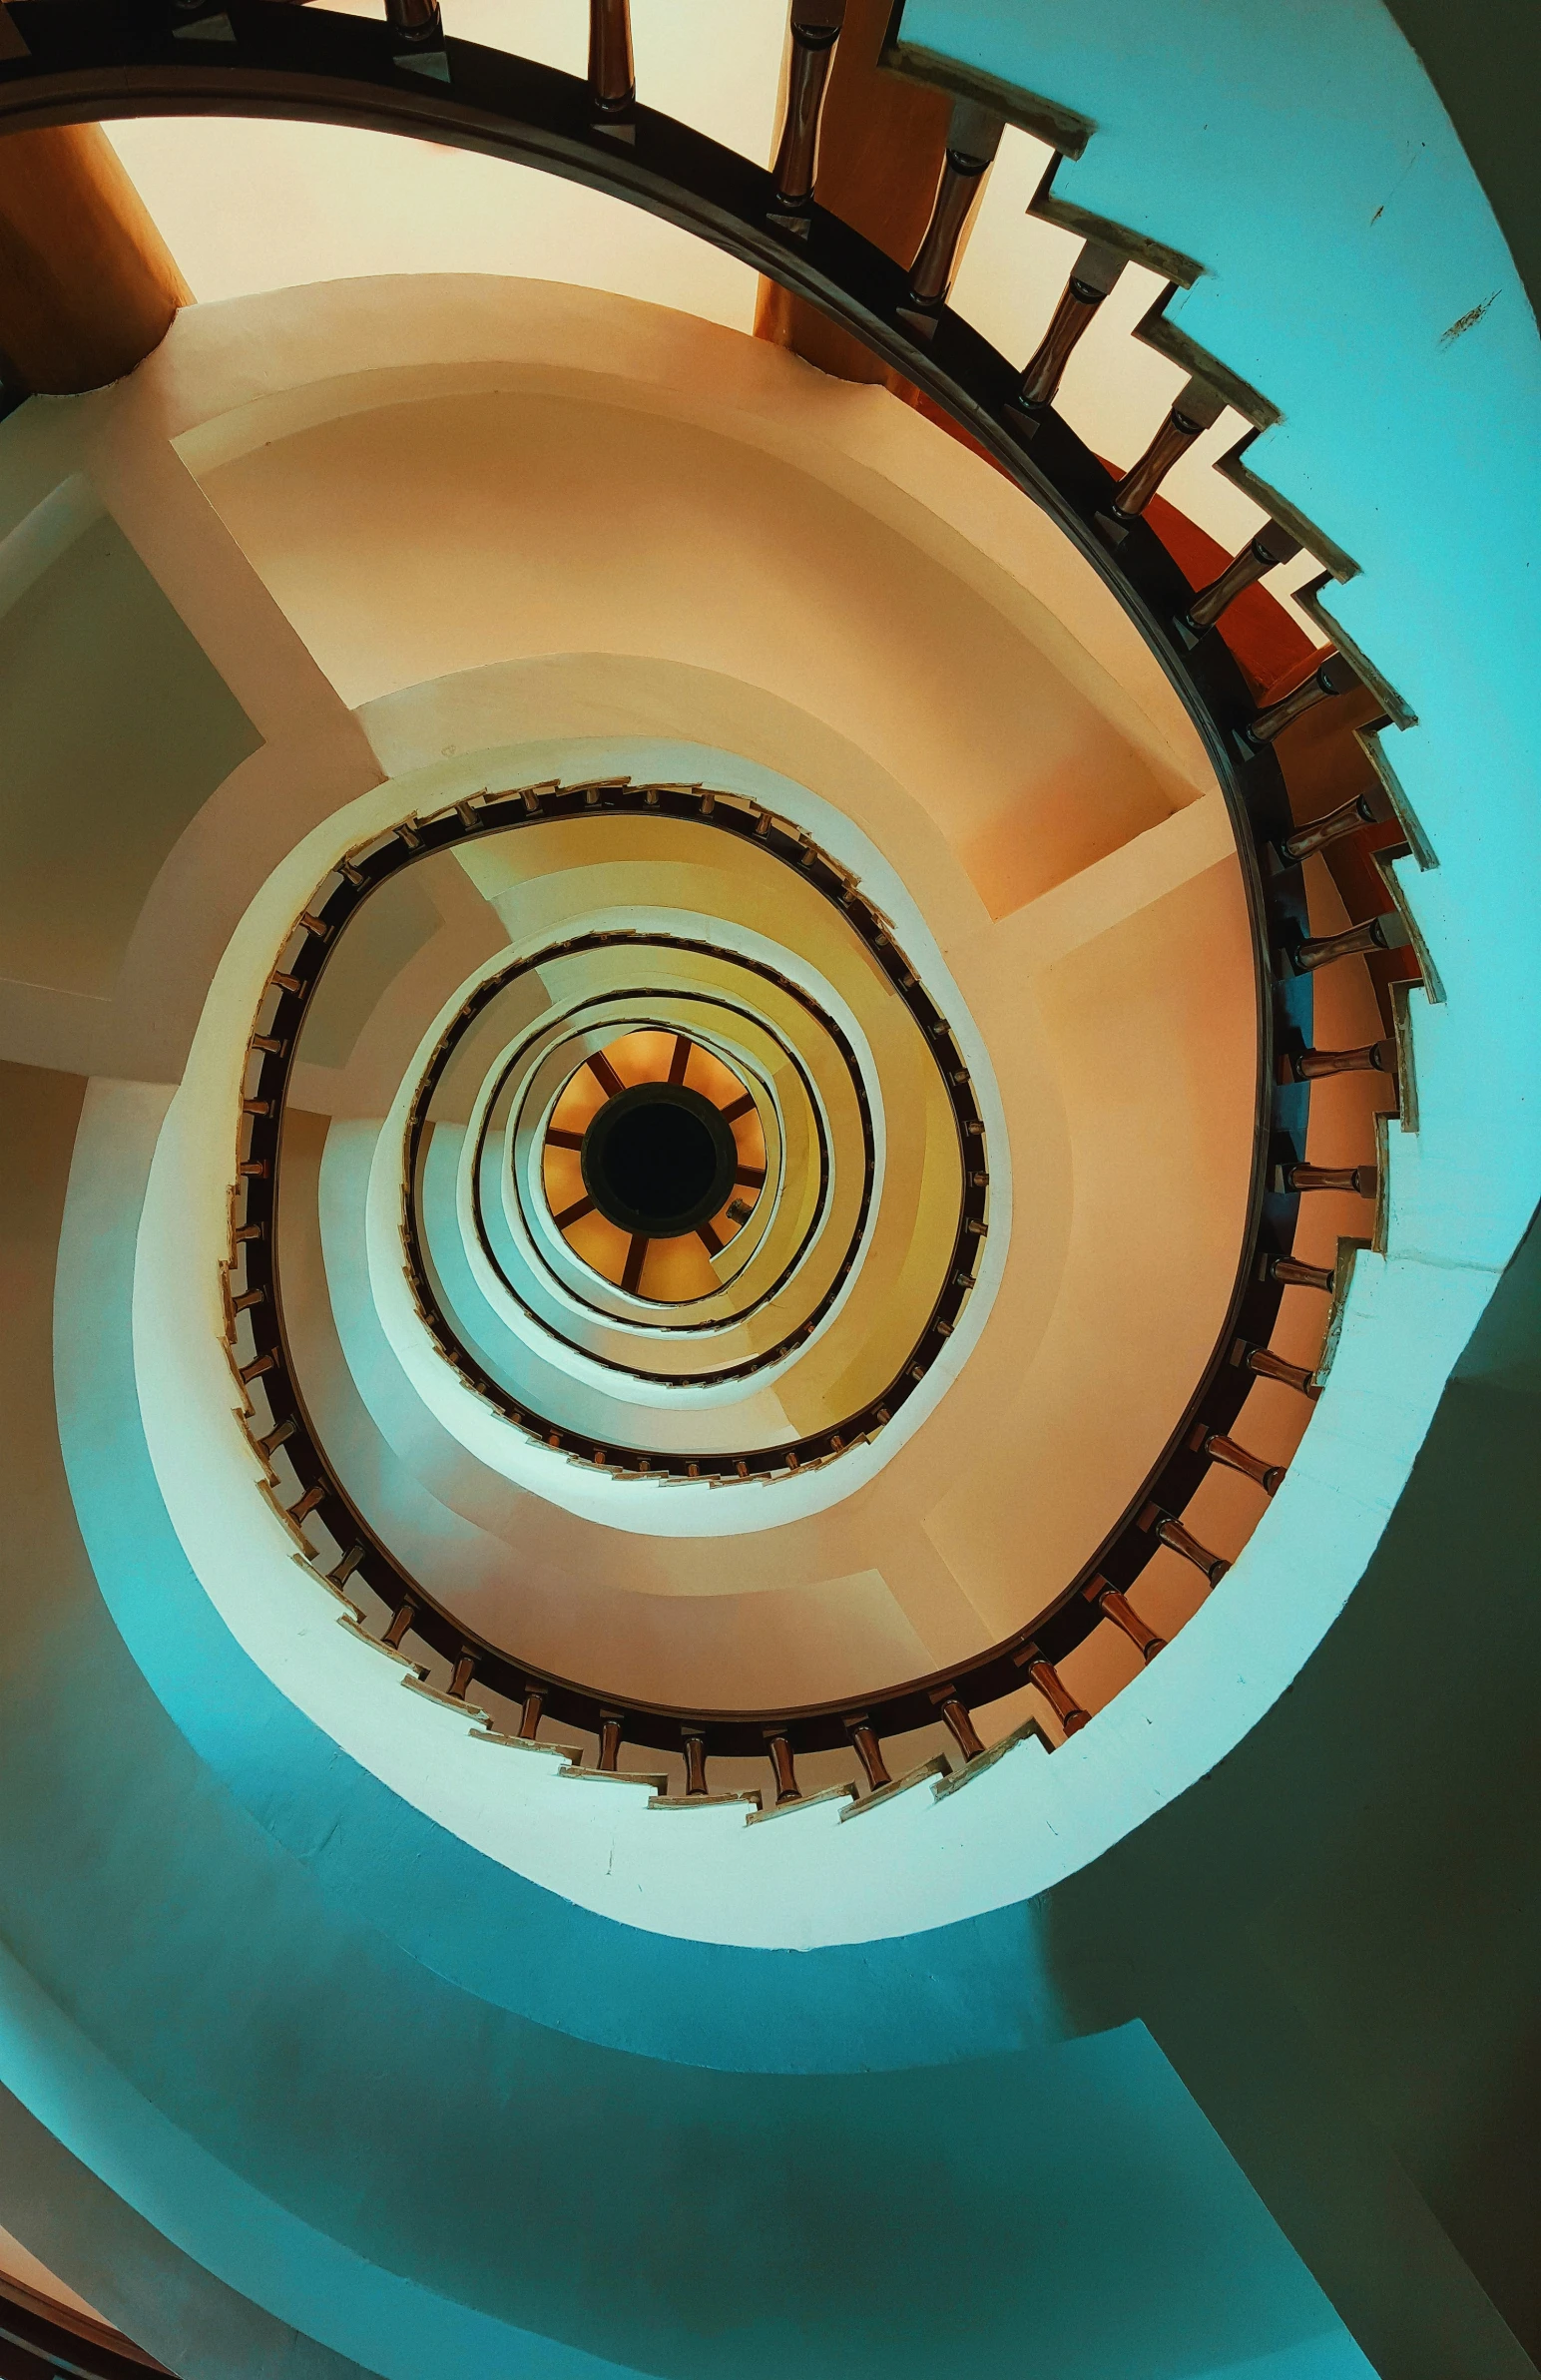 an overhead s shows the top of a spiral staircase